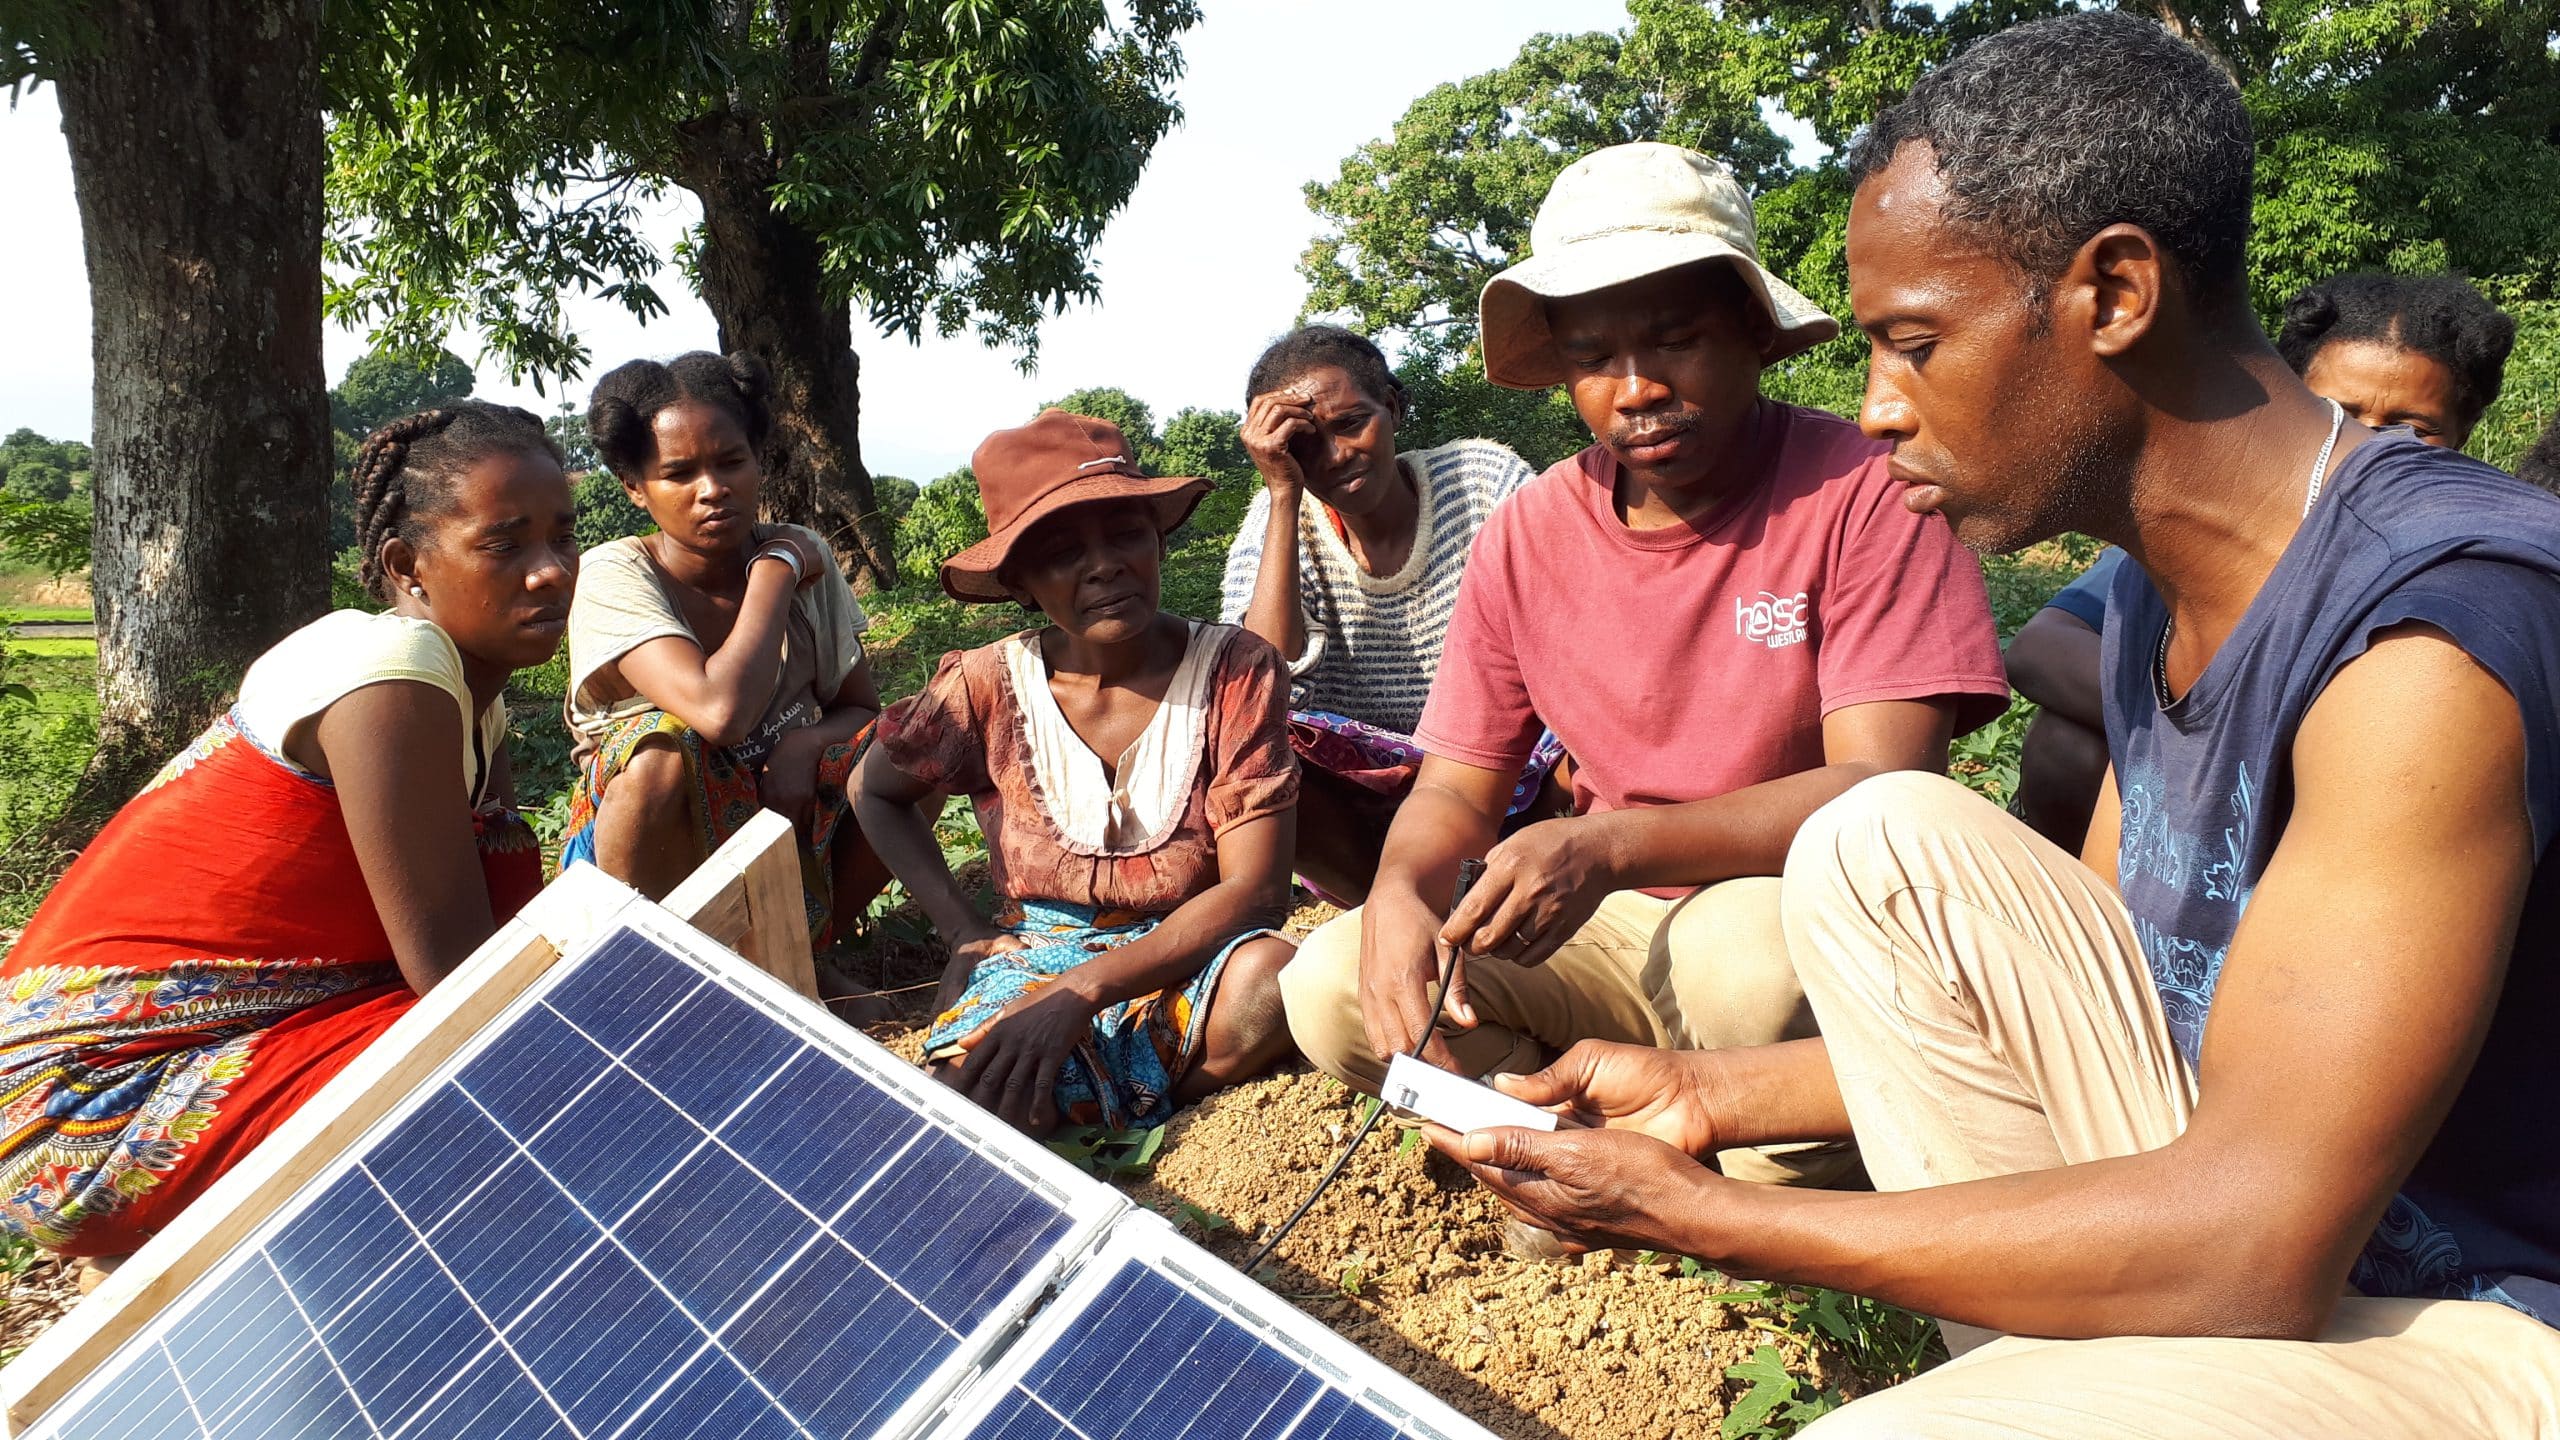 Demonstration of an app to a group of women next to solar panels